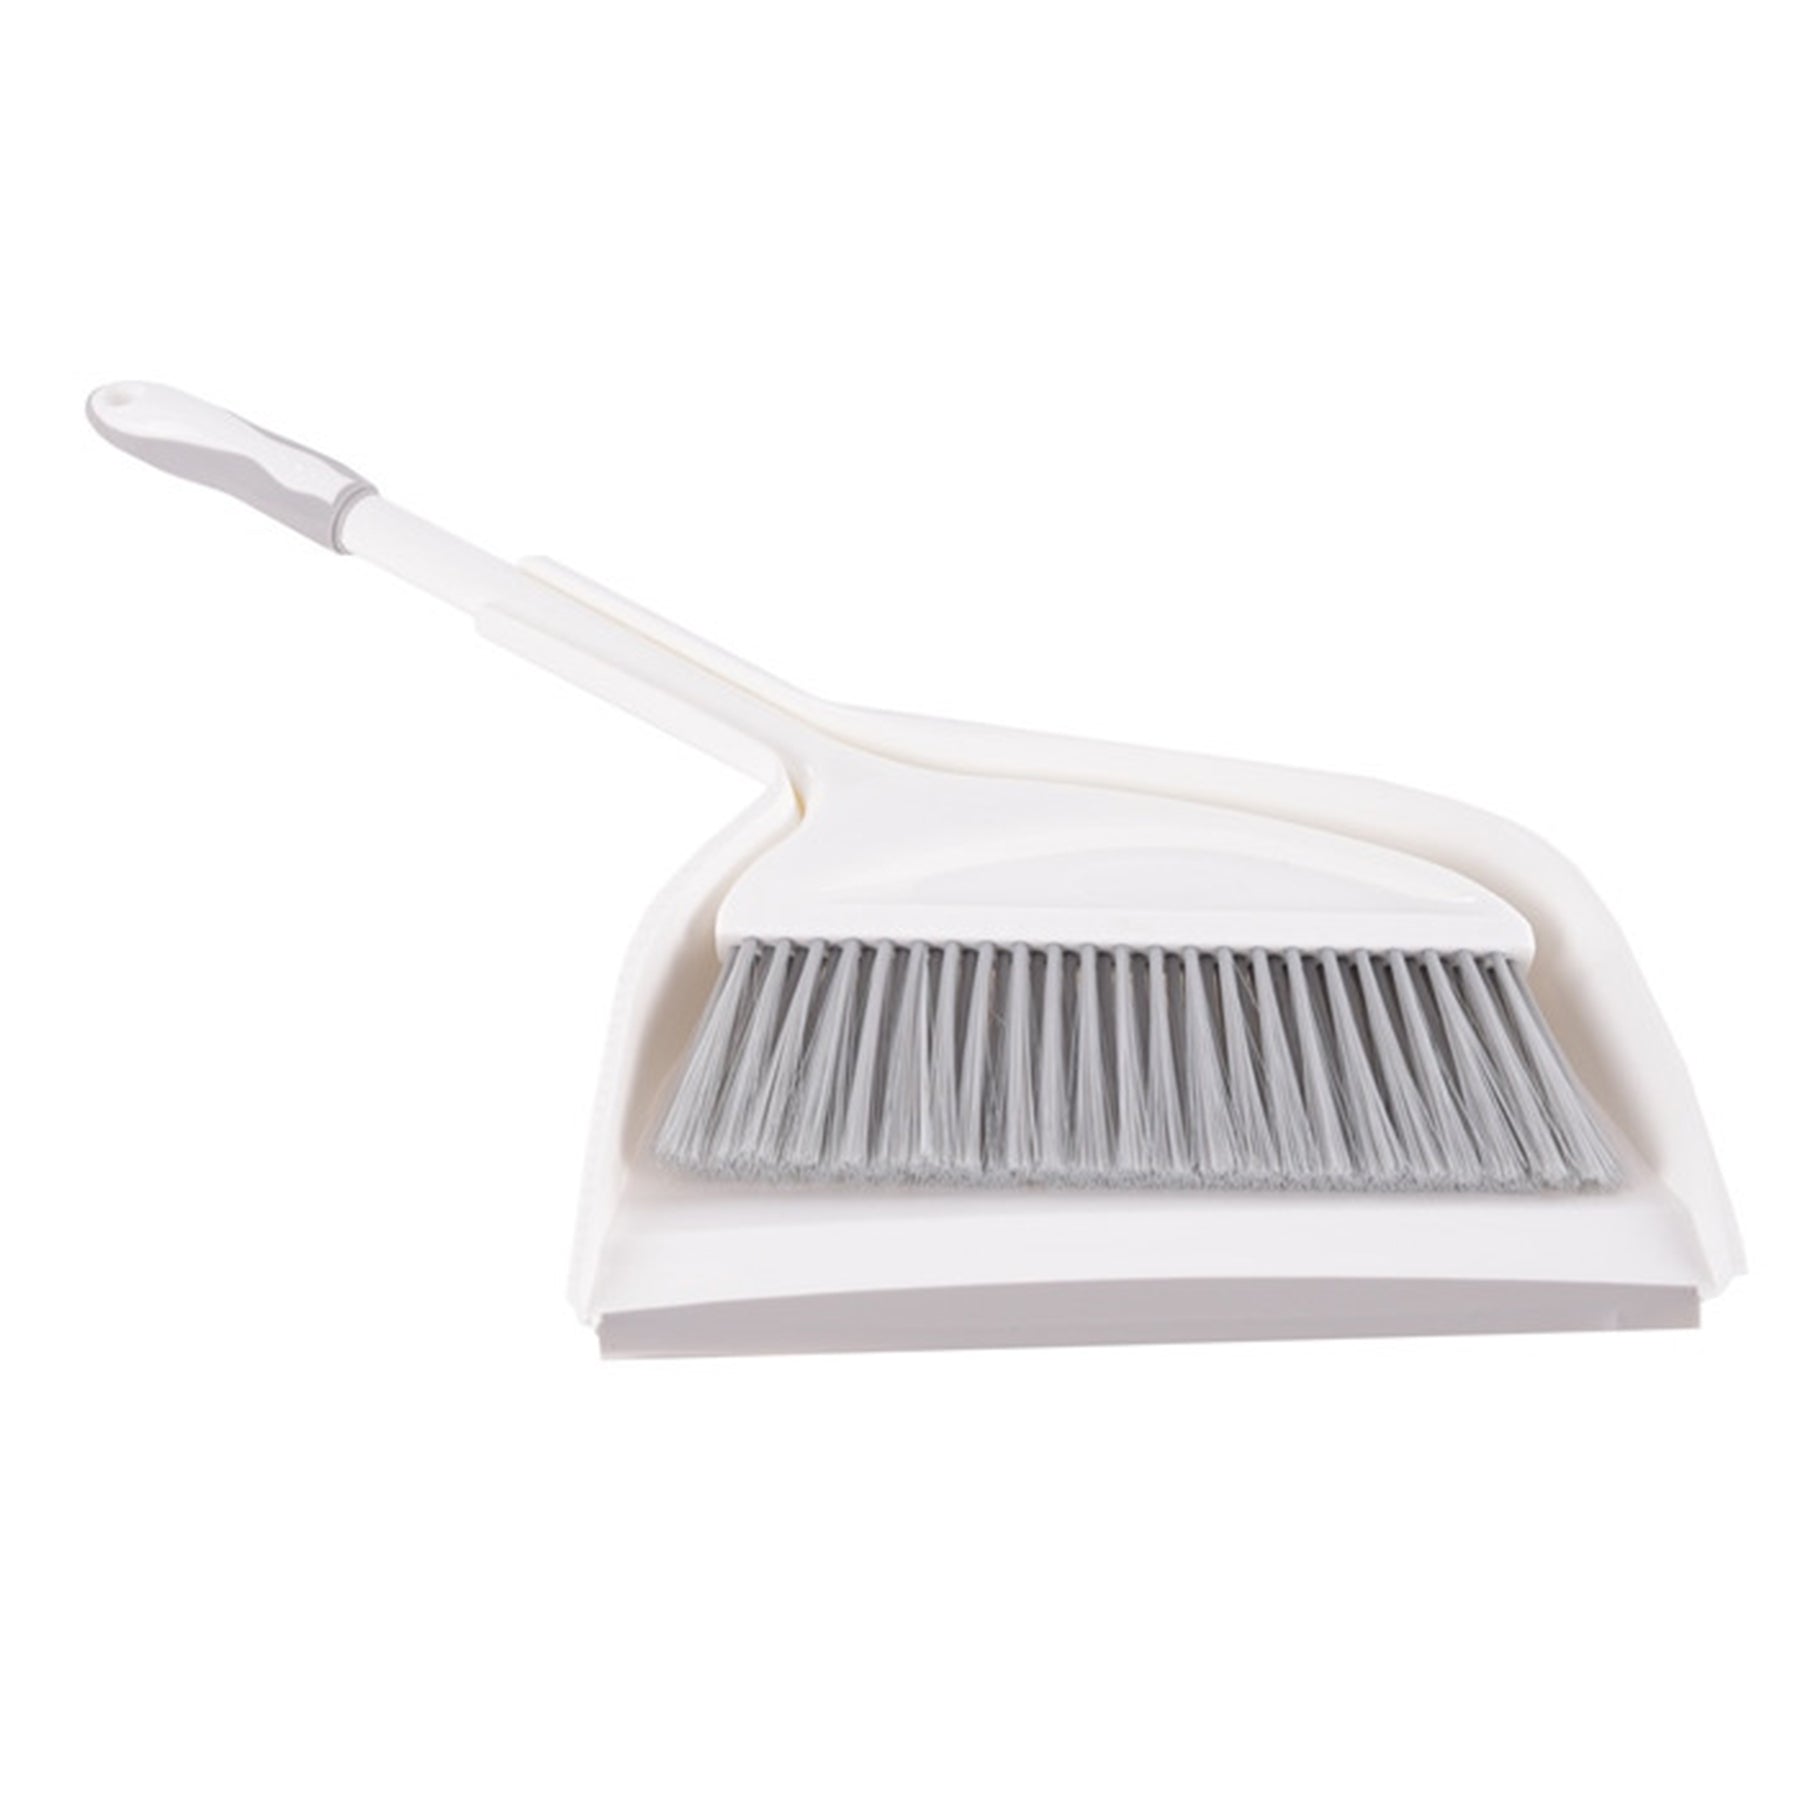 Dustpan with Cleaning Brush - White & Light Grey Color